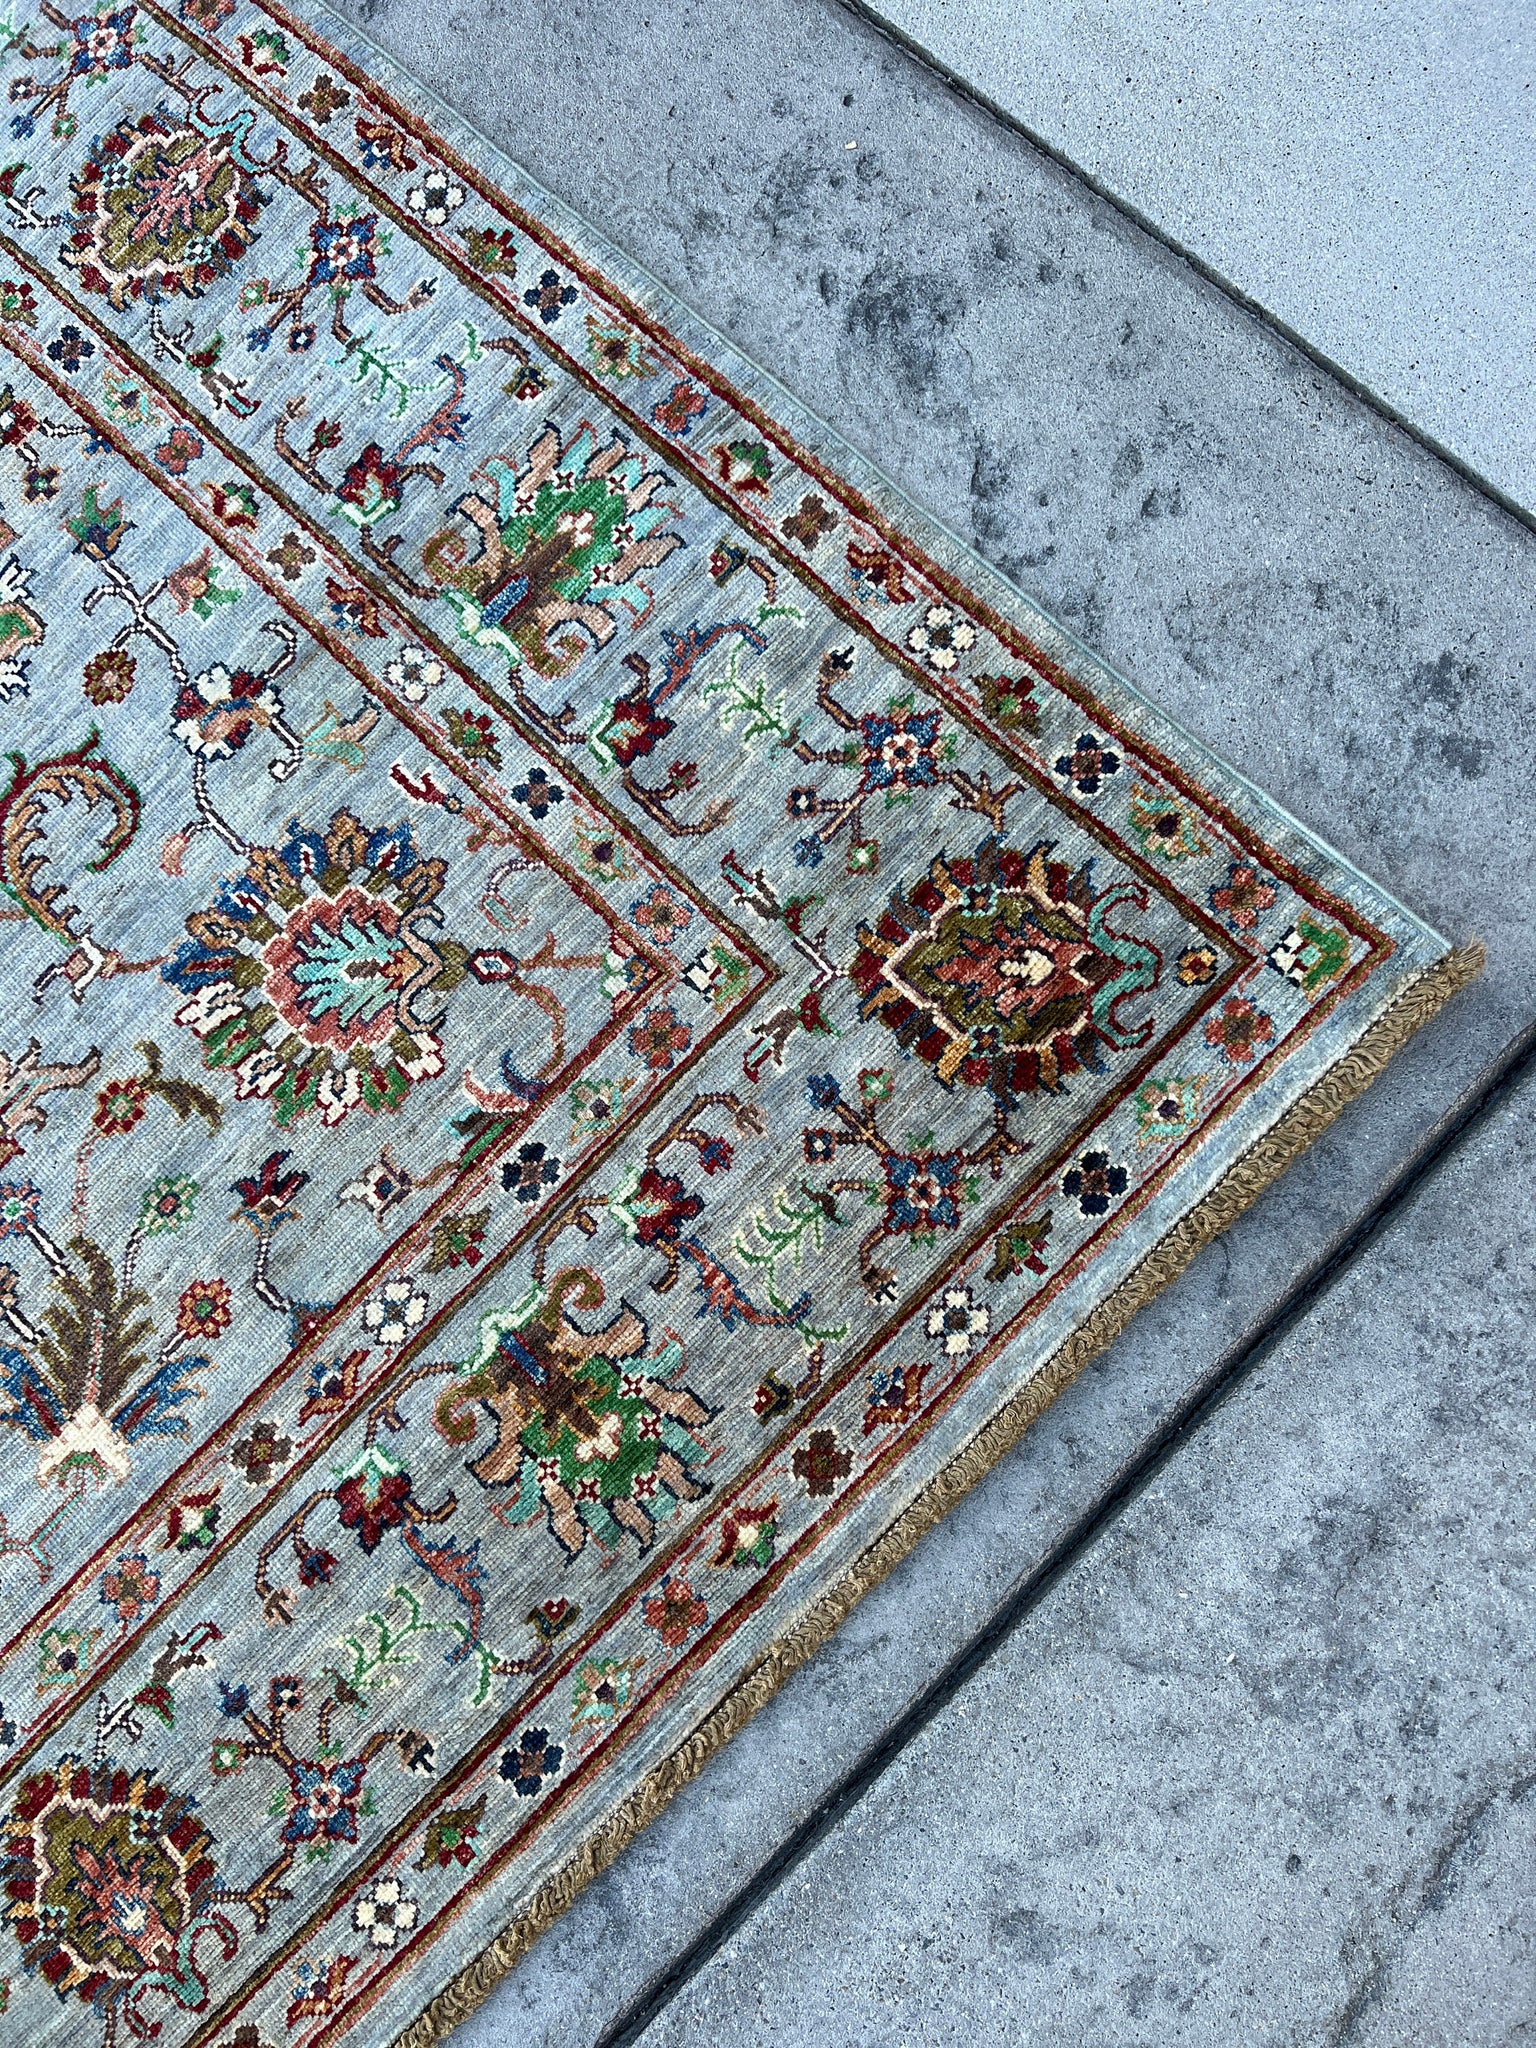 6x8 (180x245) Hand Knotted Afghan Rug | Grey Turquoise Jean Blue Forest Green Chocolate Brown Ivory Moss Green Red | Tribal Floral Wool